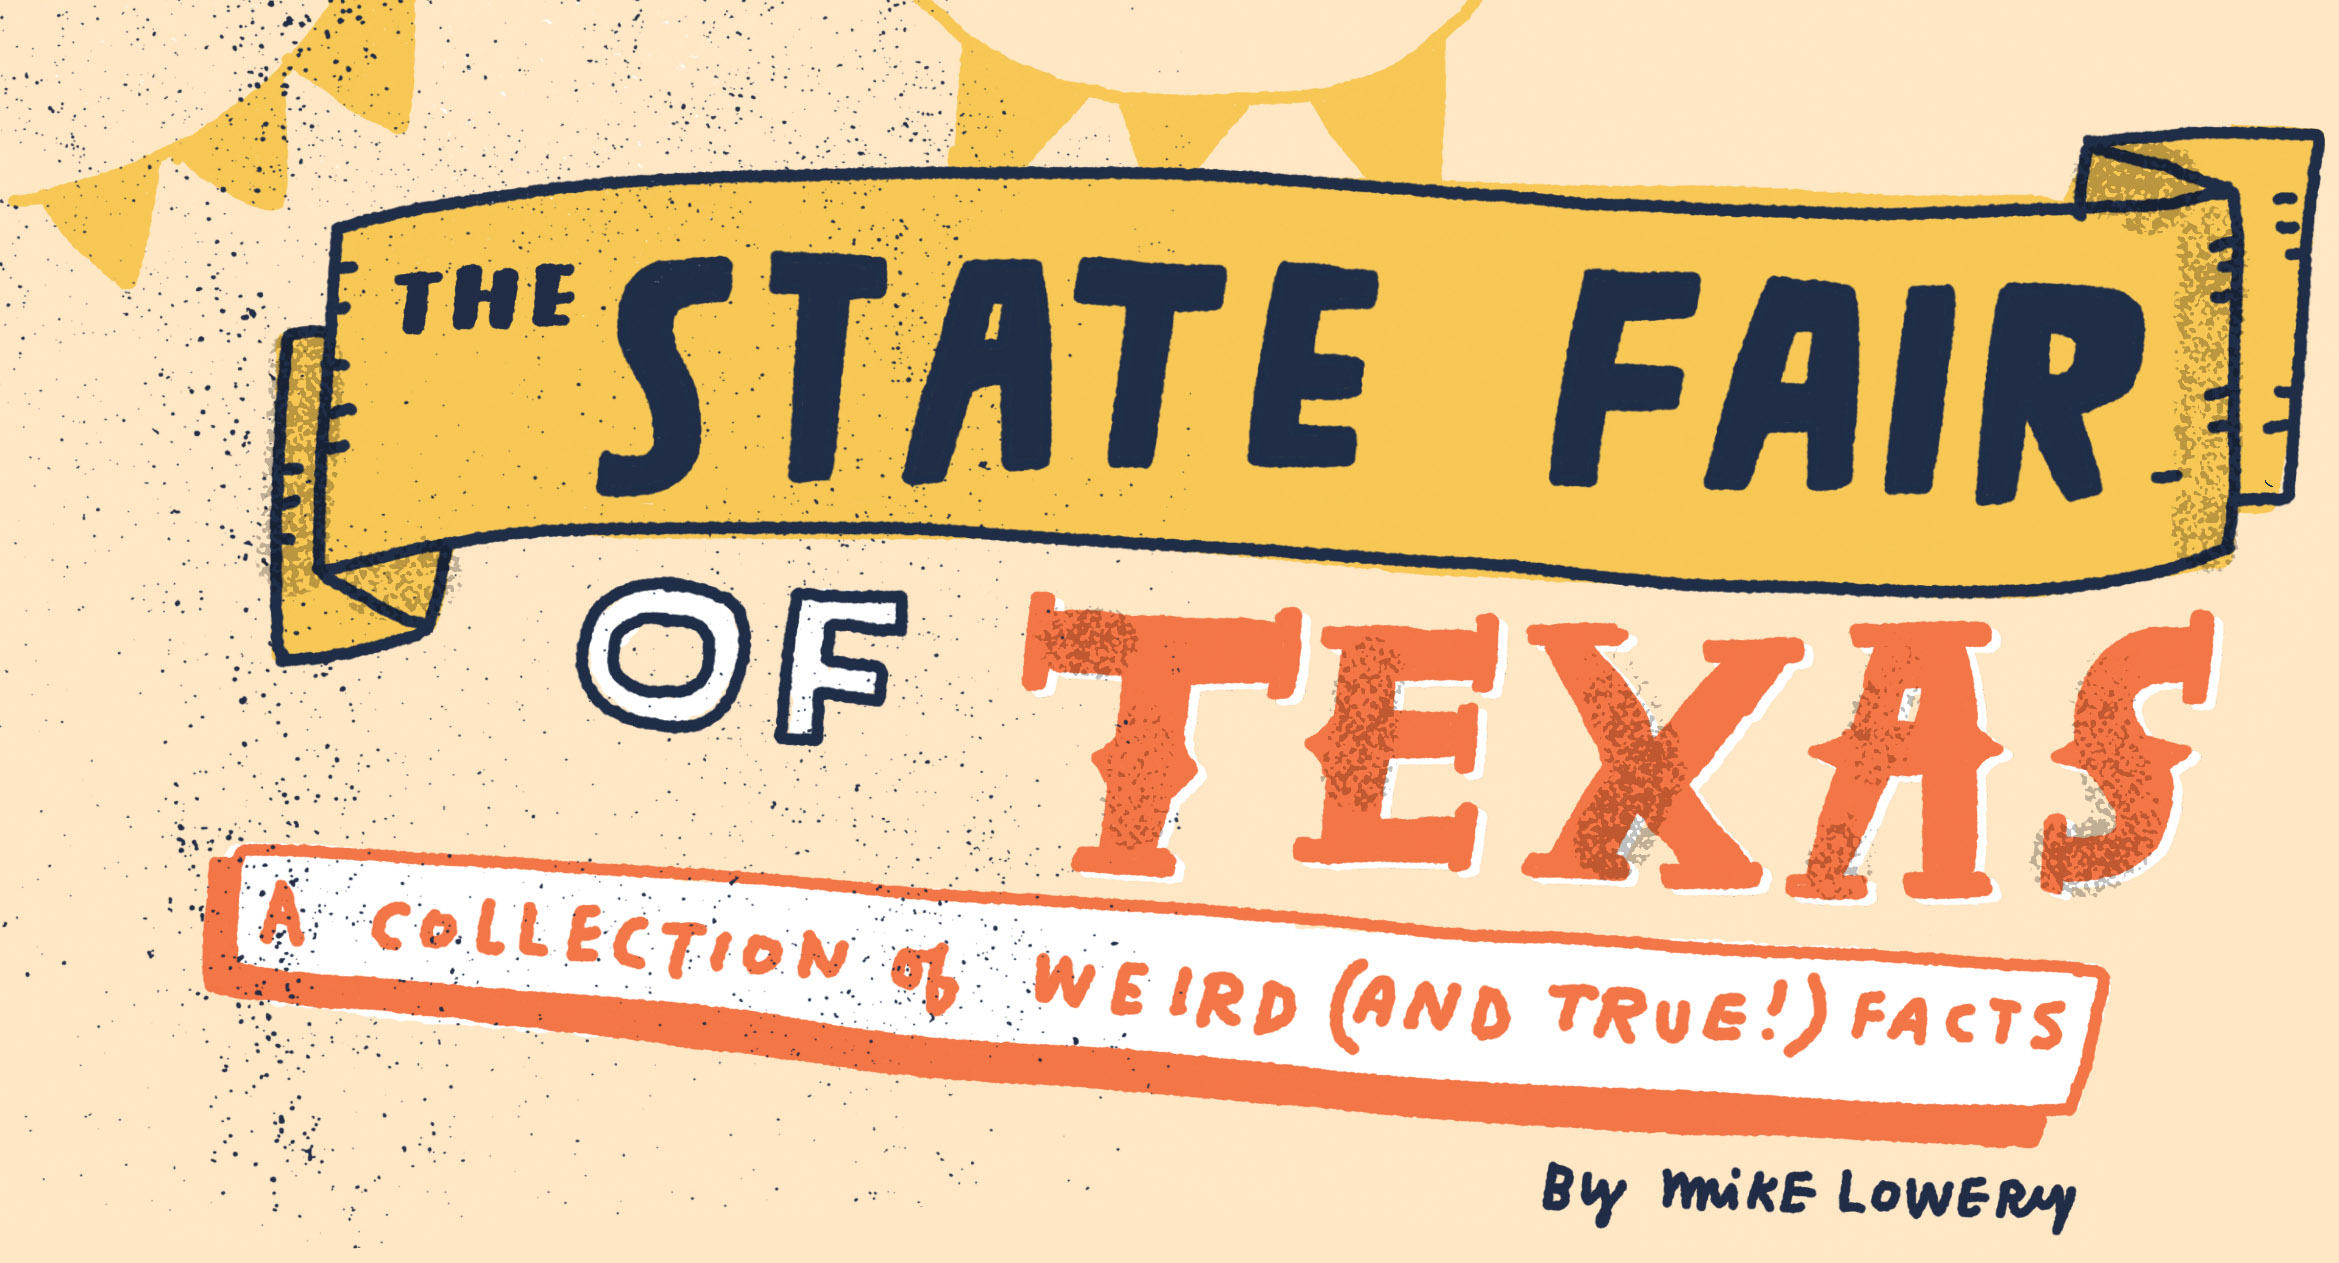 The State Fair of Texas: A collection of weird (and true!) facts by Mike Lowery